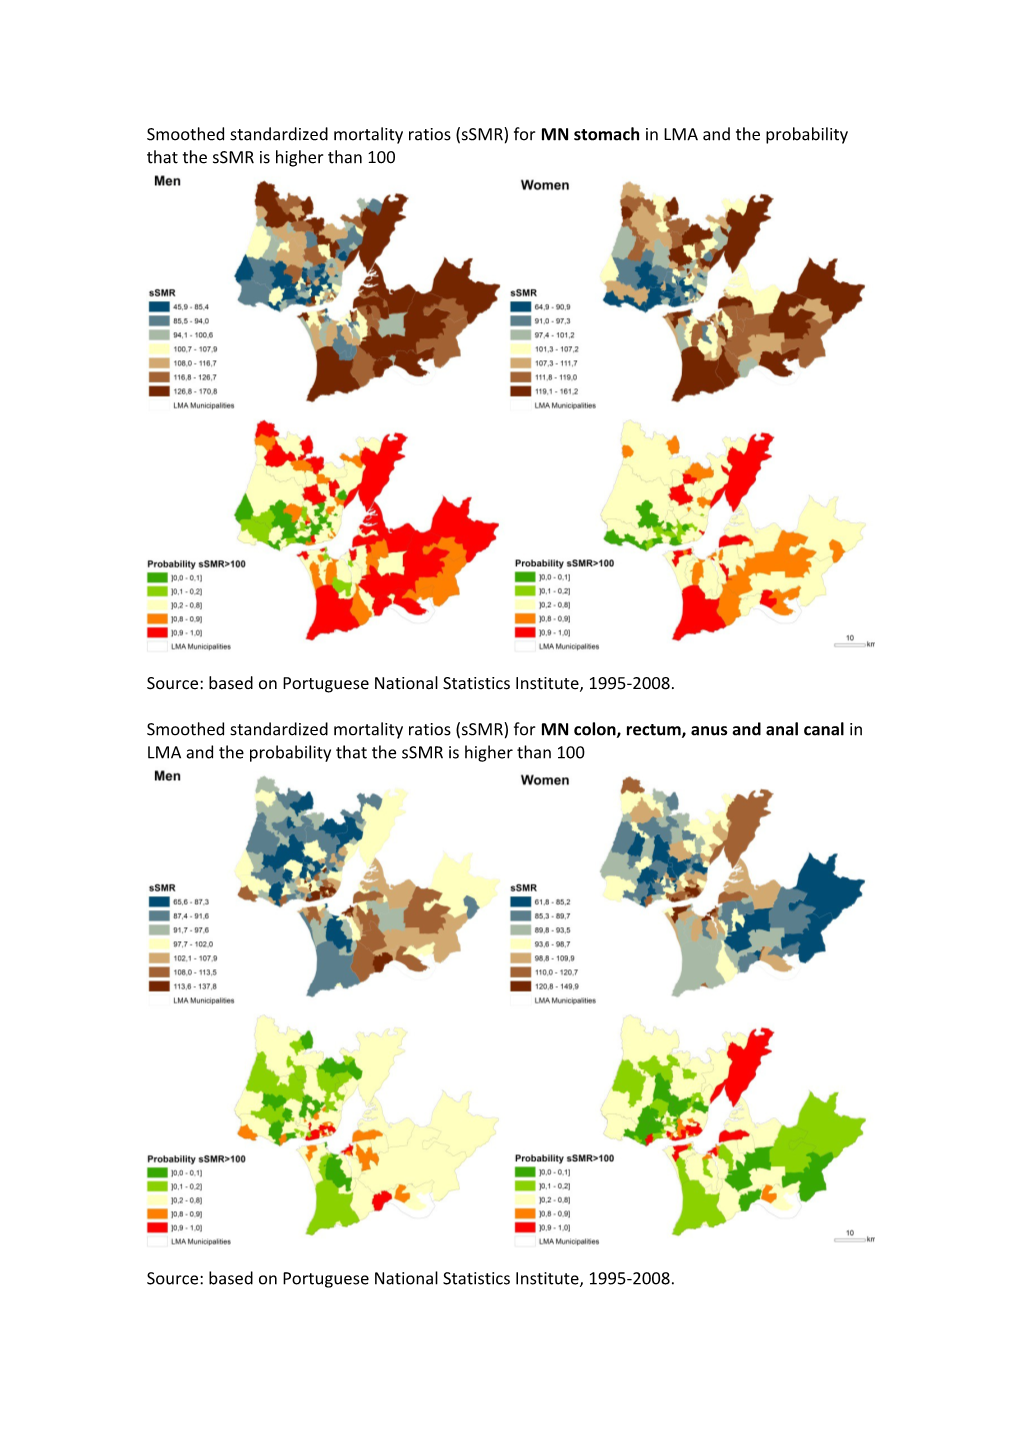 Additional File: Maps of Smoothed Standardized Mortality Ratios (Ssmr) for Specific Cause